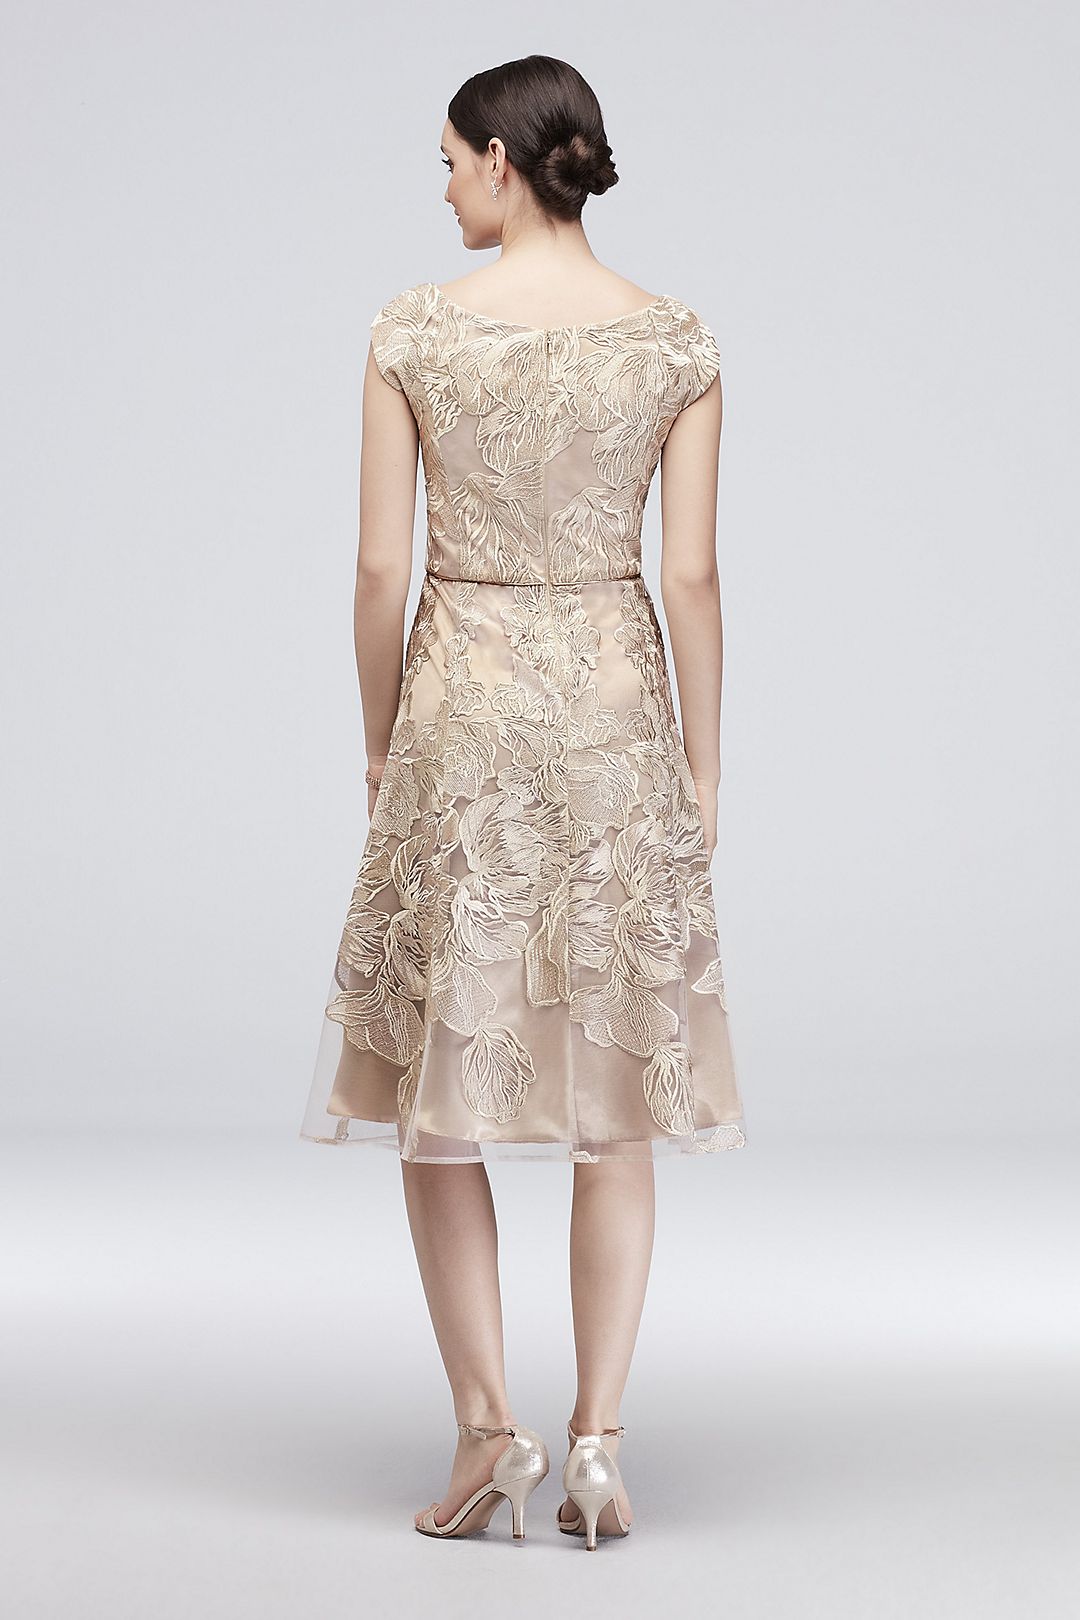 Floral Embroidered Short Cap Sleeve A-Line Dress Image 2